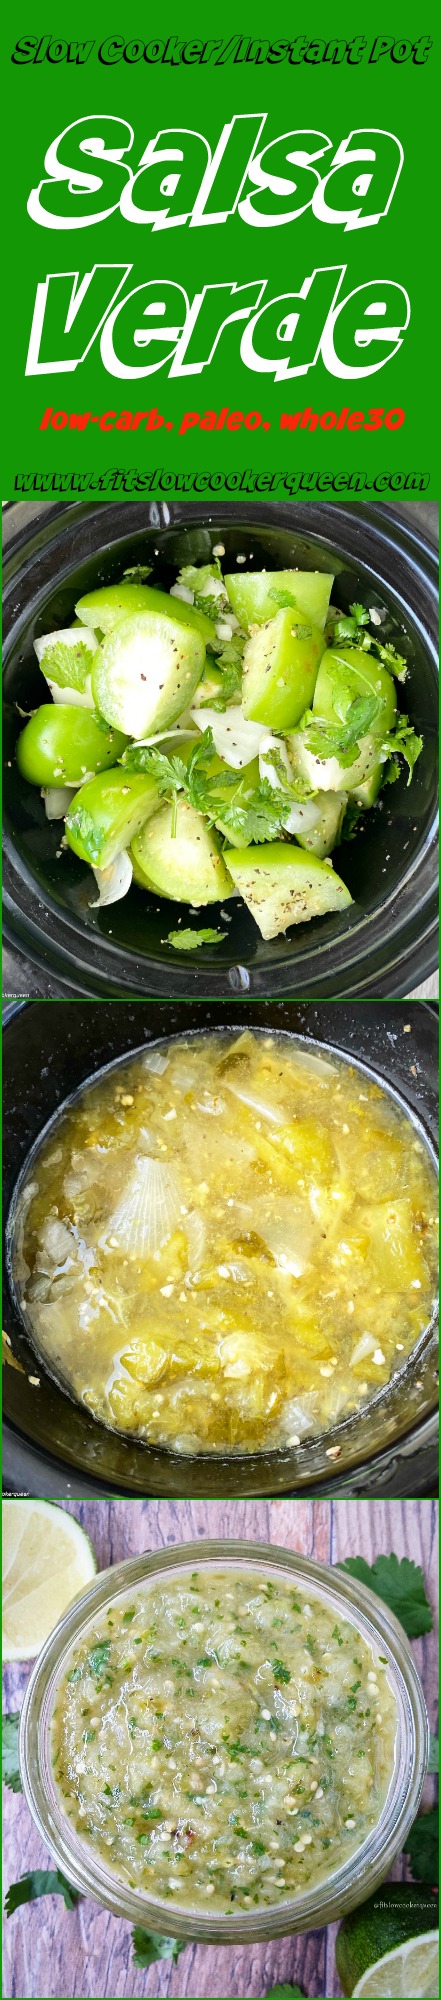 another pinterest pin for Slow Cooker_Instant Pot Salsa Verde (Low-Carb, Paleo, Whole30)